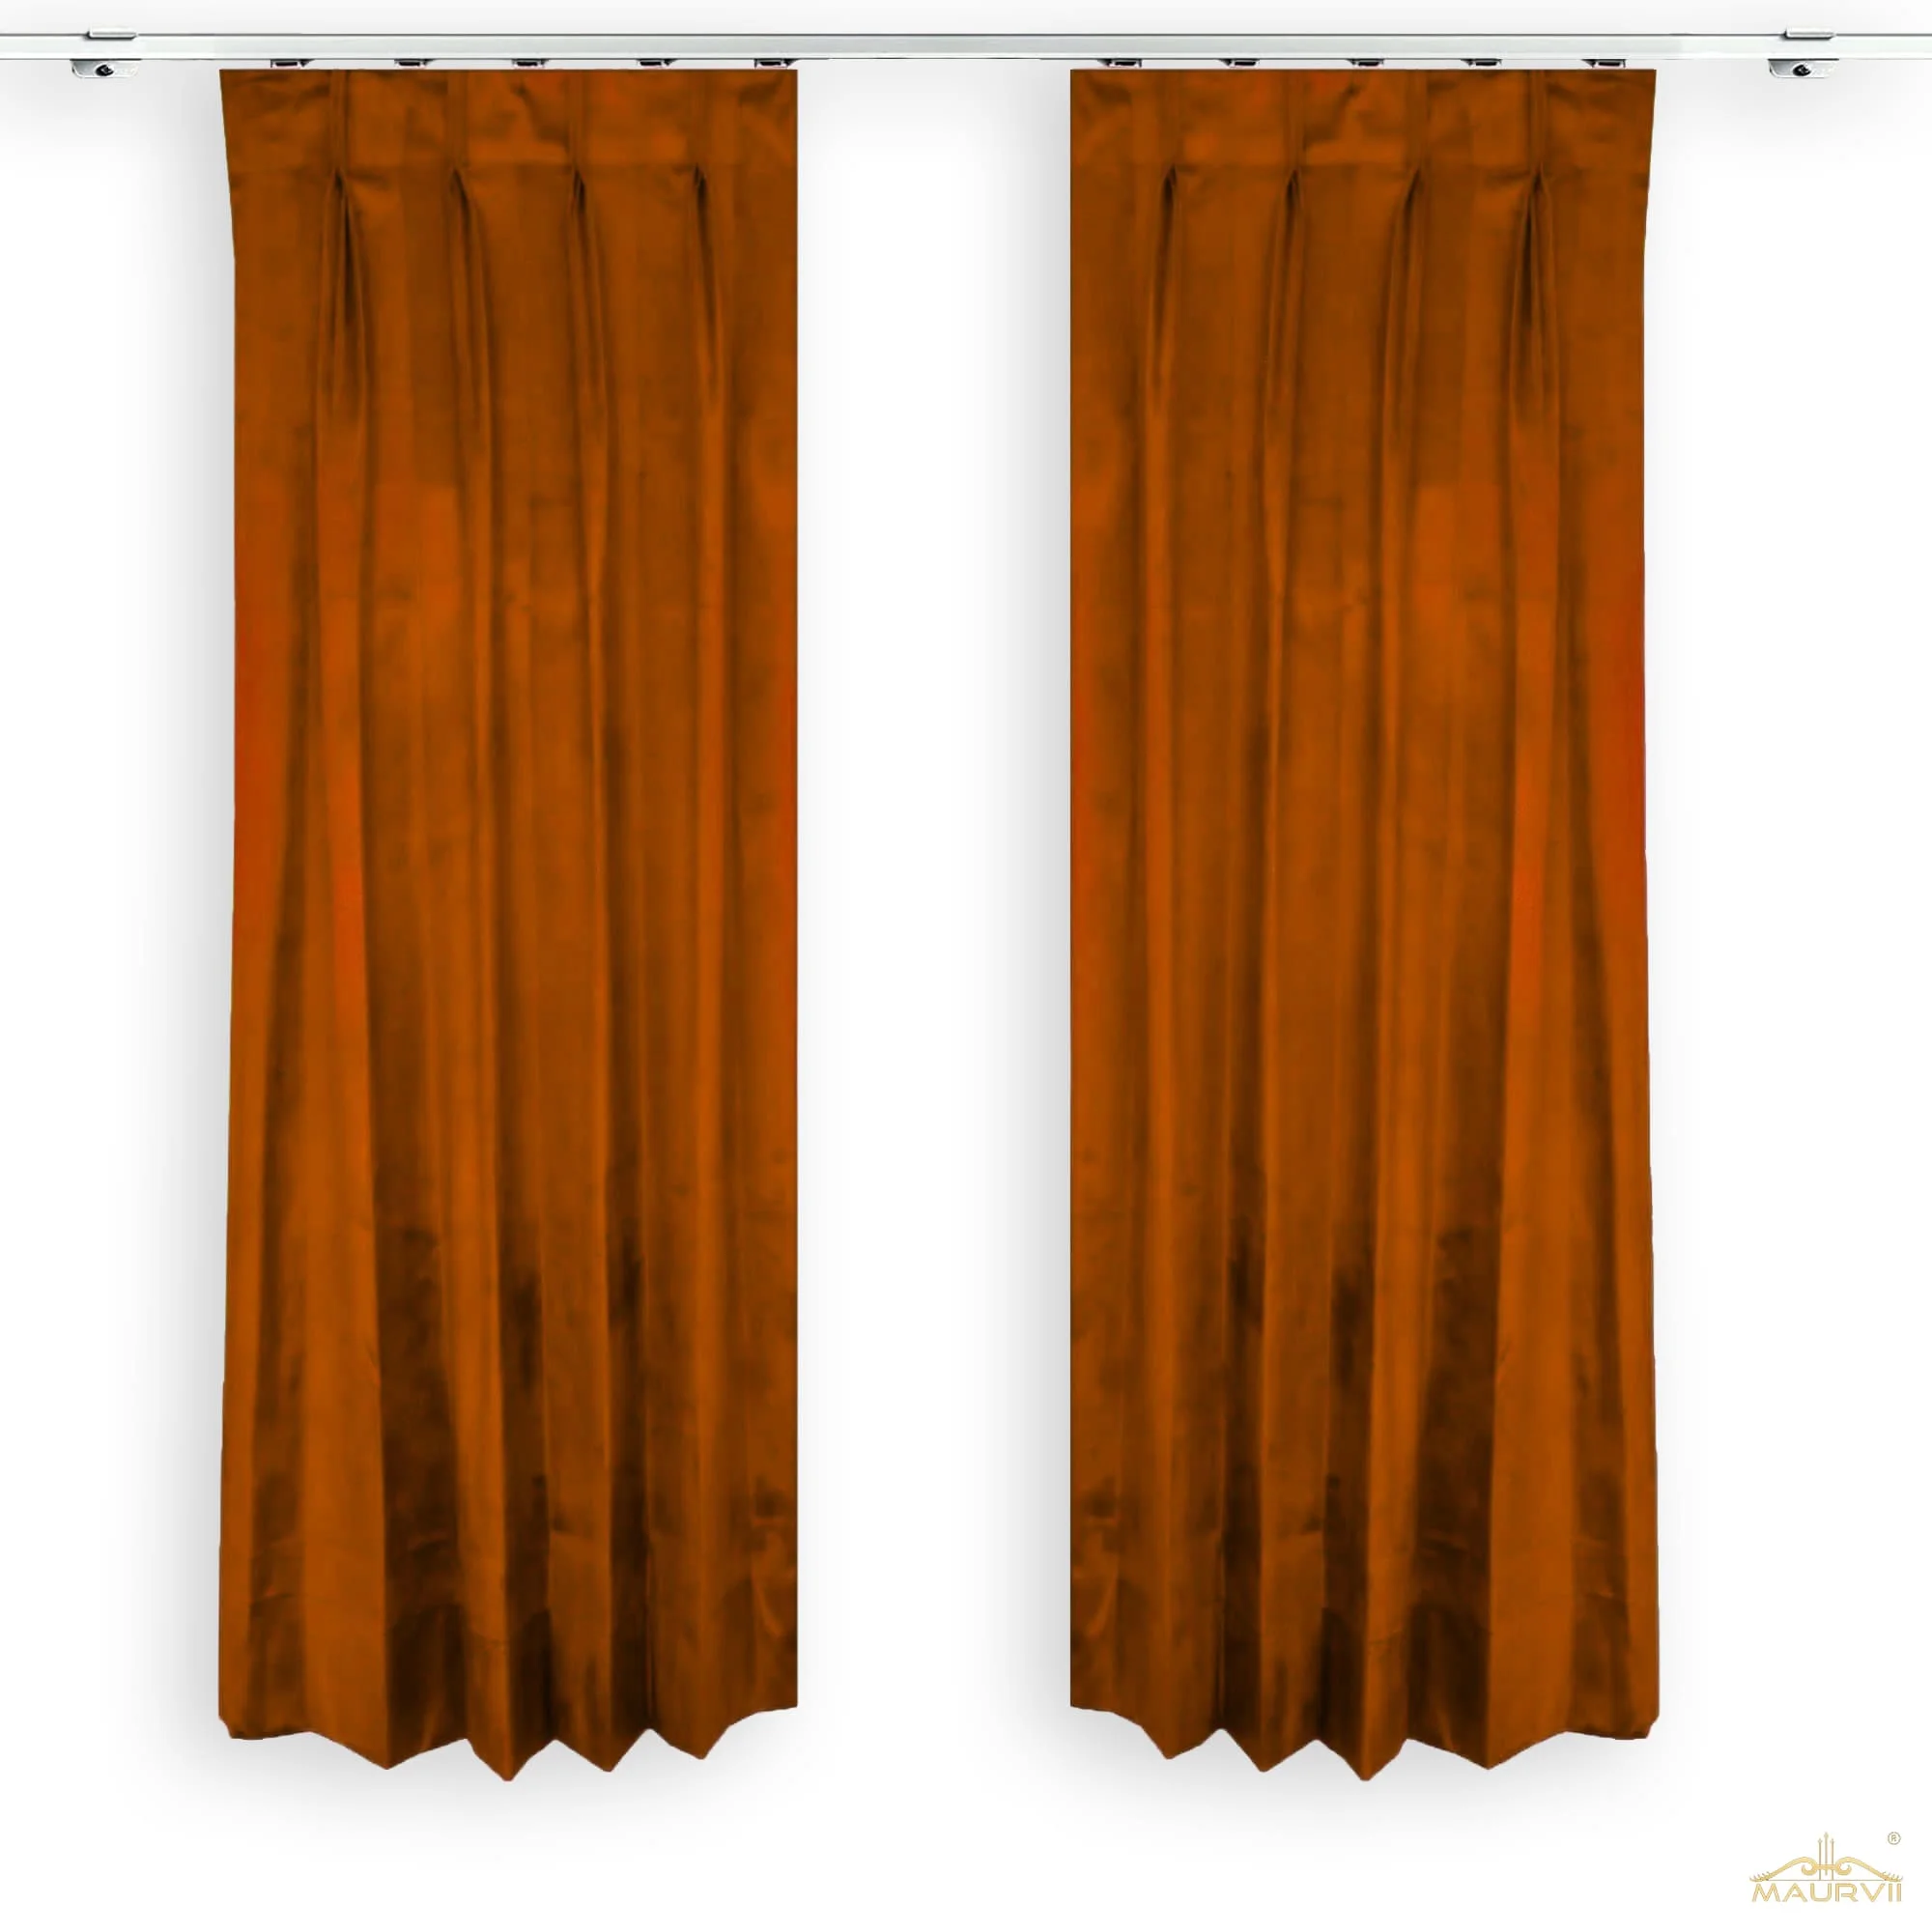 Rust living room curtains